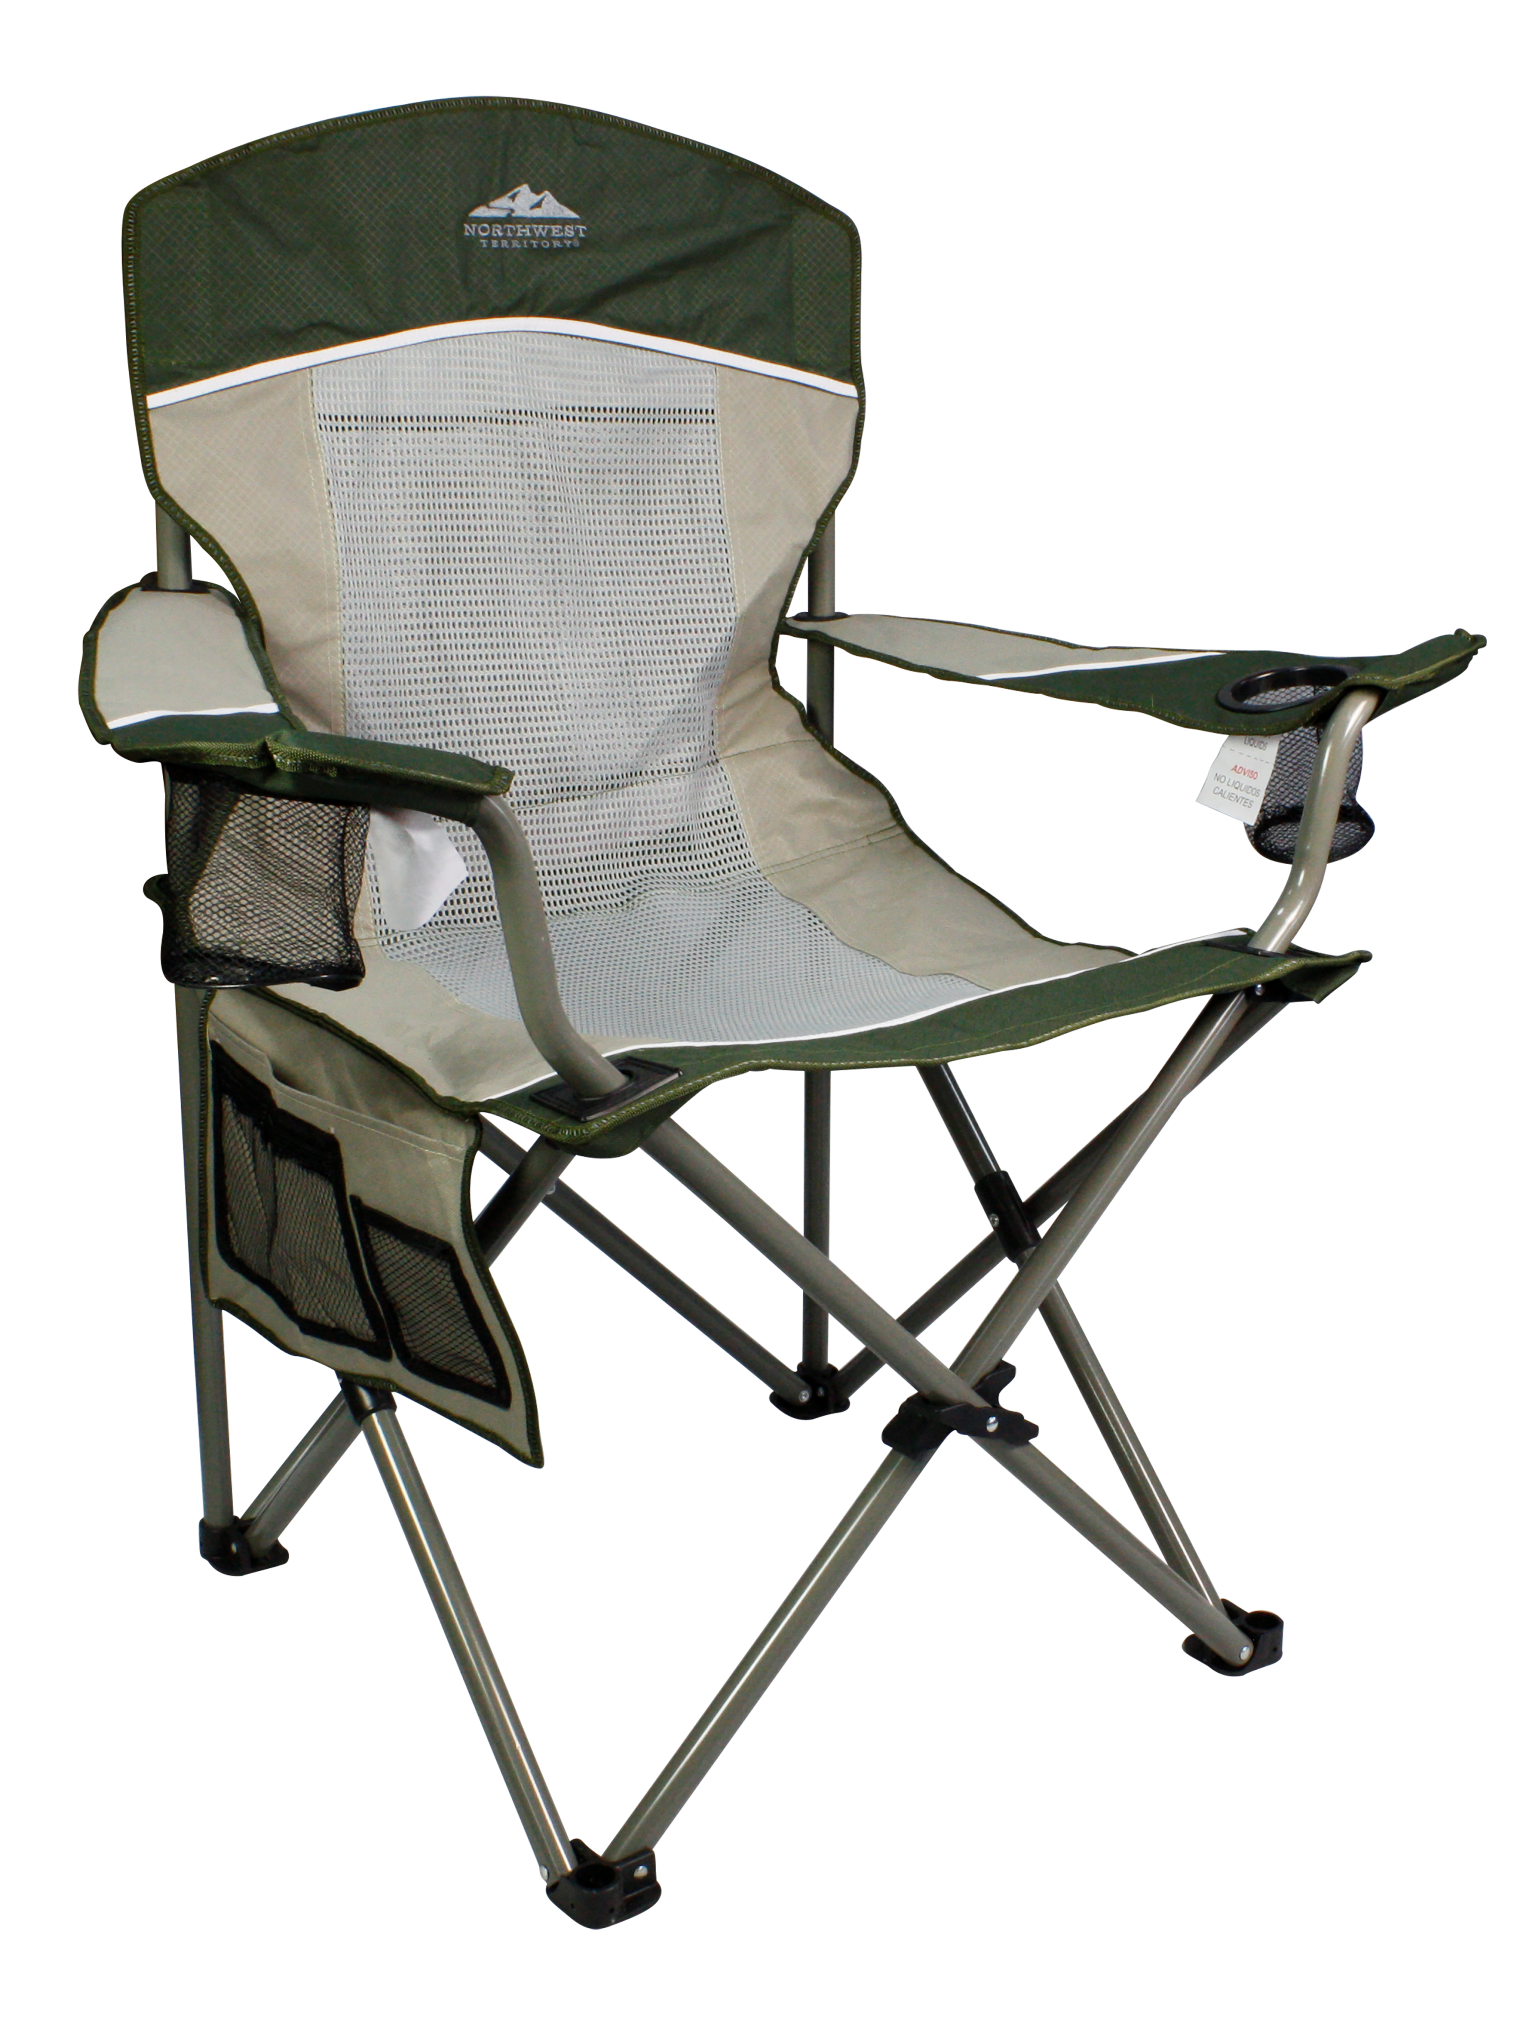 kmart camping chairs